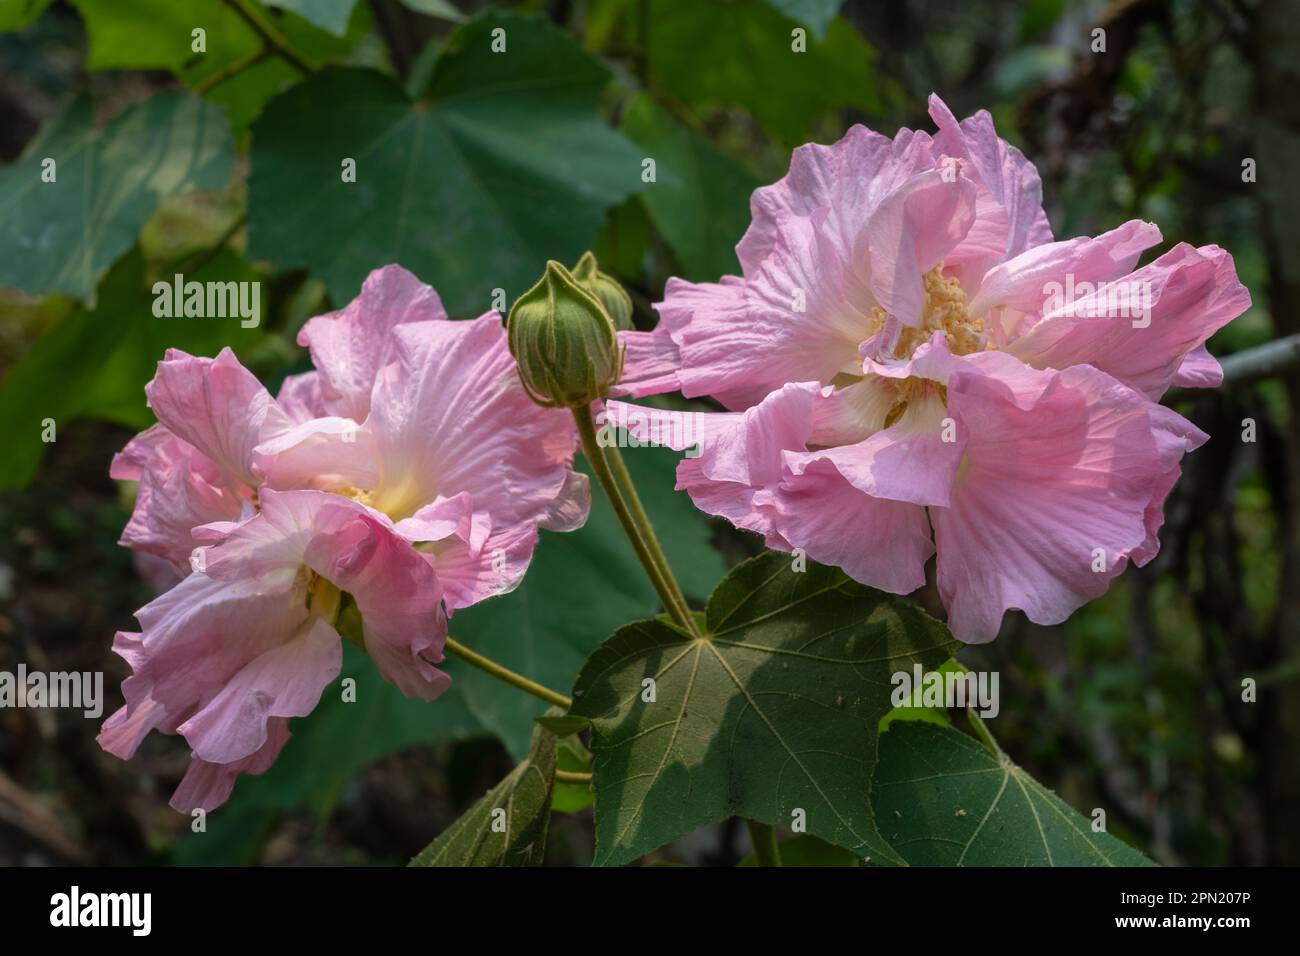 Closeup view of white turning pink tropical hibiscus mutabilis aka Confederate rose or Dixie rosemallow flowers and buds outdoors in bright sunlight Stock Photo